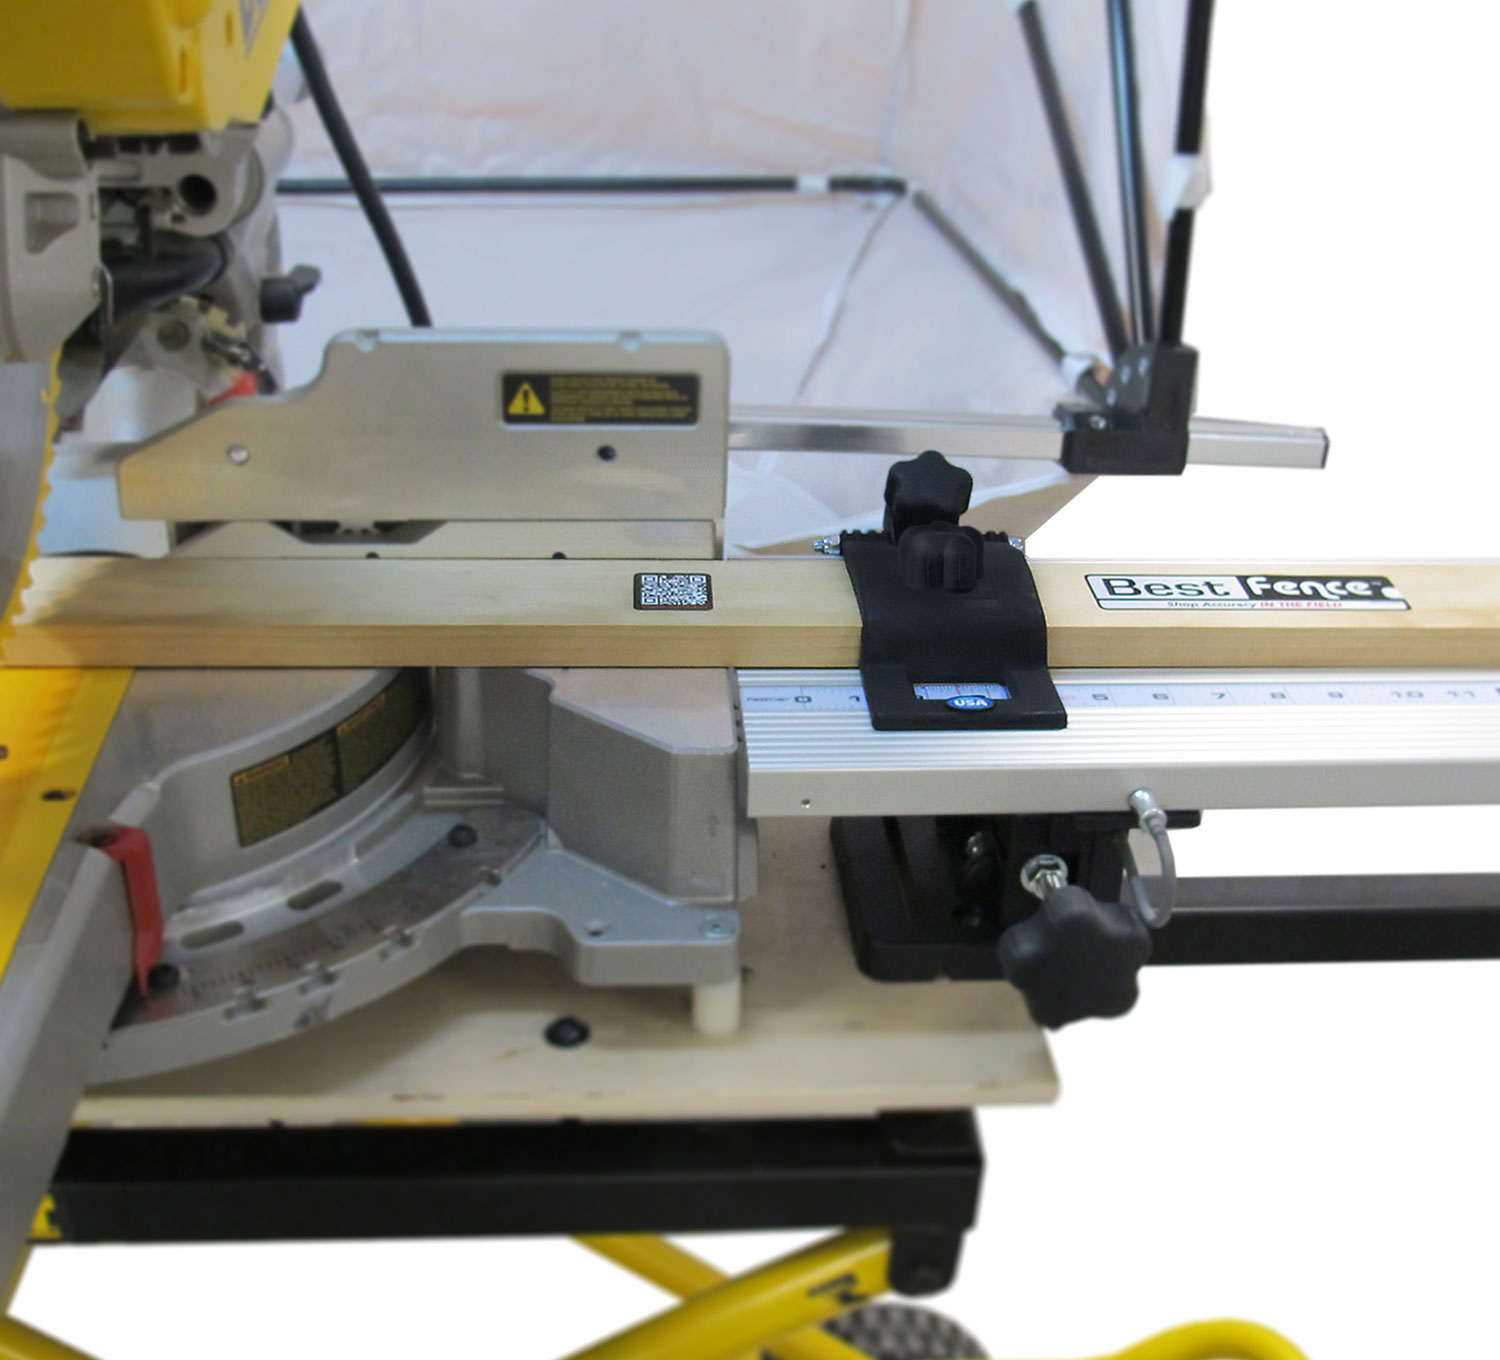 Fastcap mitersaw zero clearance for shopsmith - Shopsmith Forums